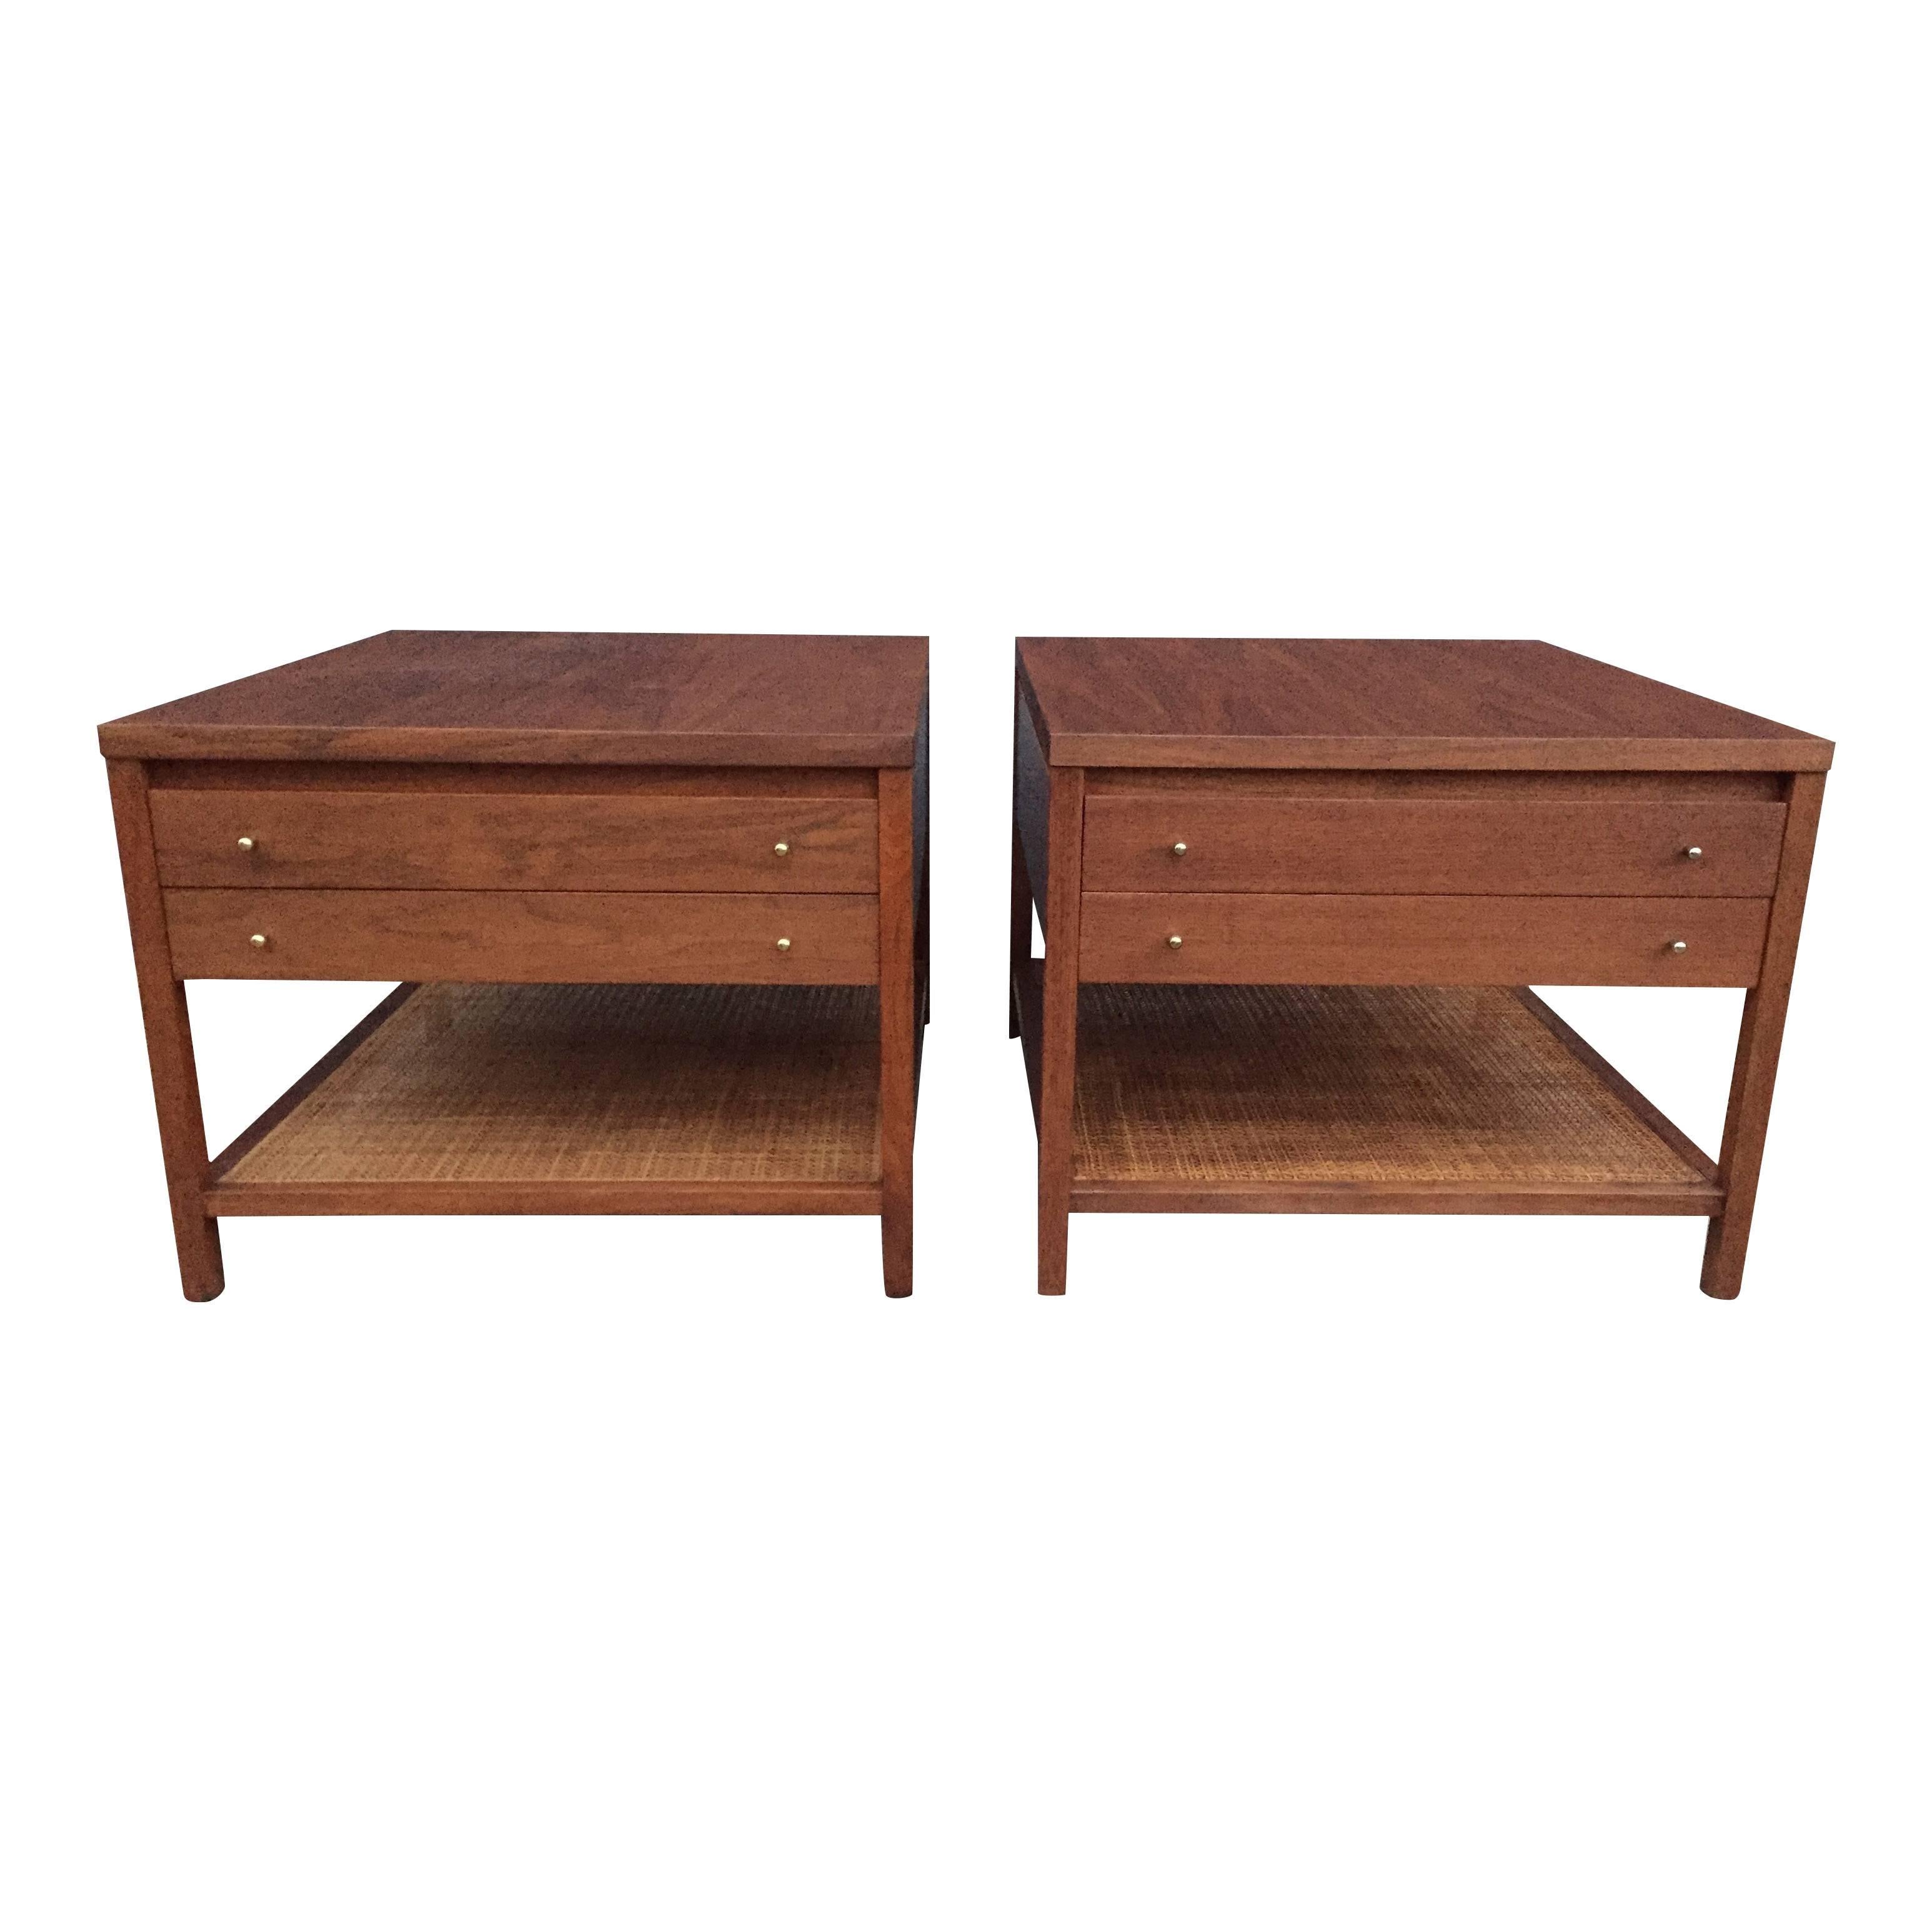 A pair of Paul McCobb side tables for Calvin Group having rattan lower shelves, two drawers and brass pulls. Excellent as end tables, side tables or bedside tables. Expertly restored and refinished.